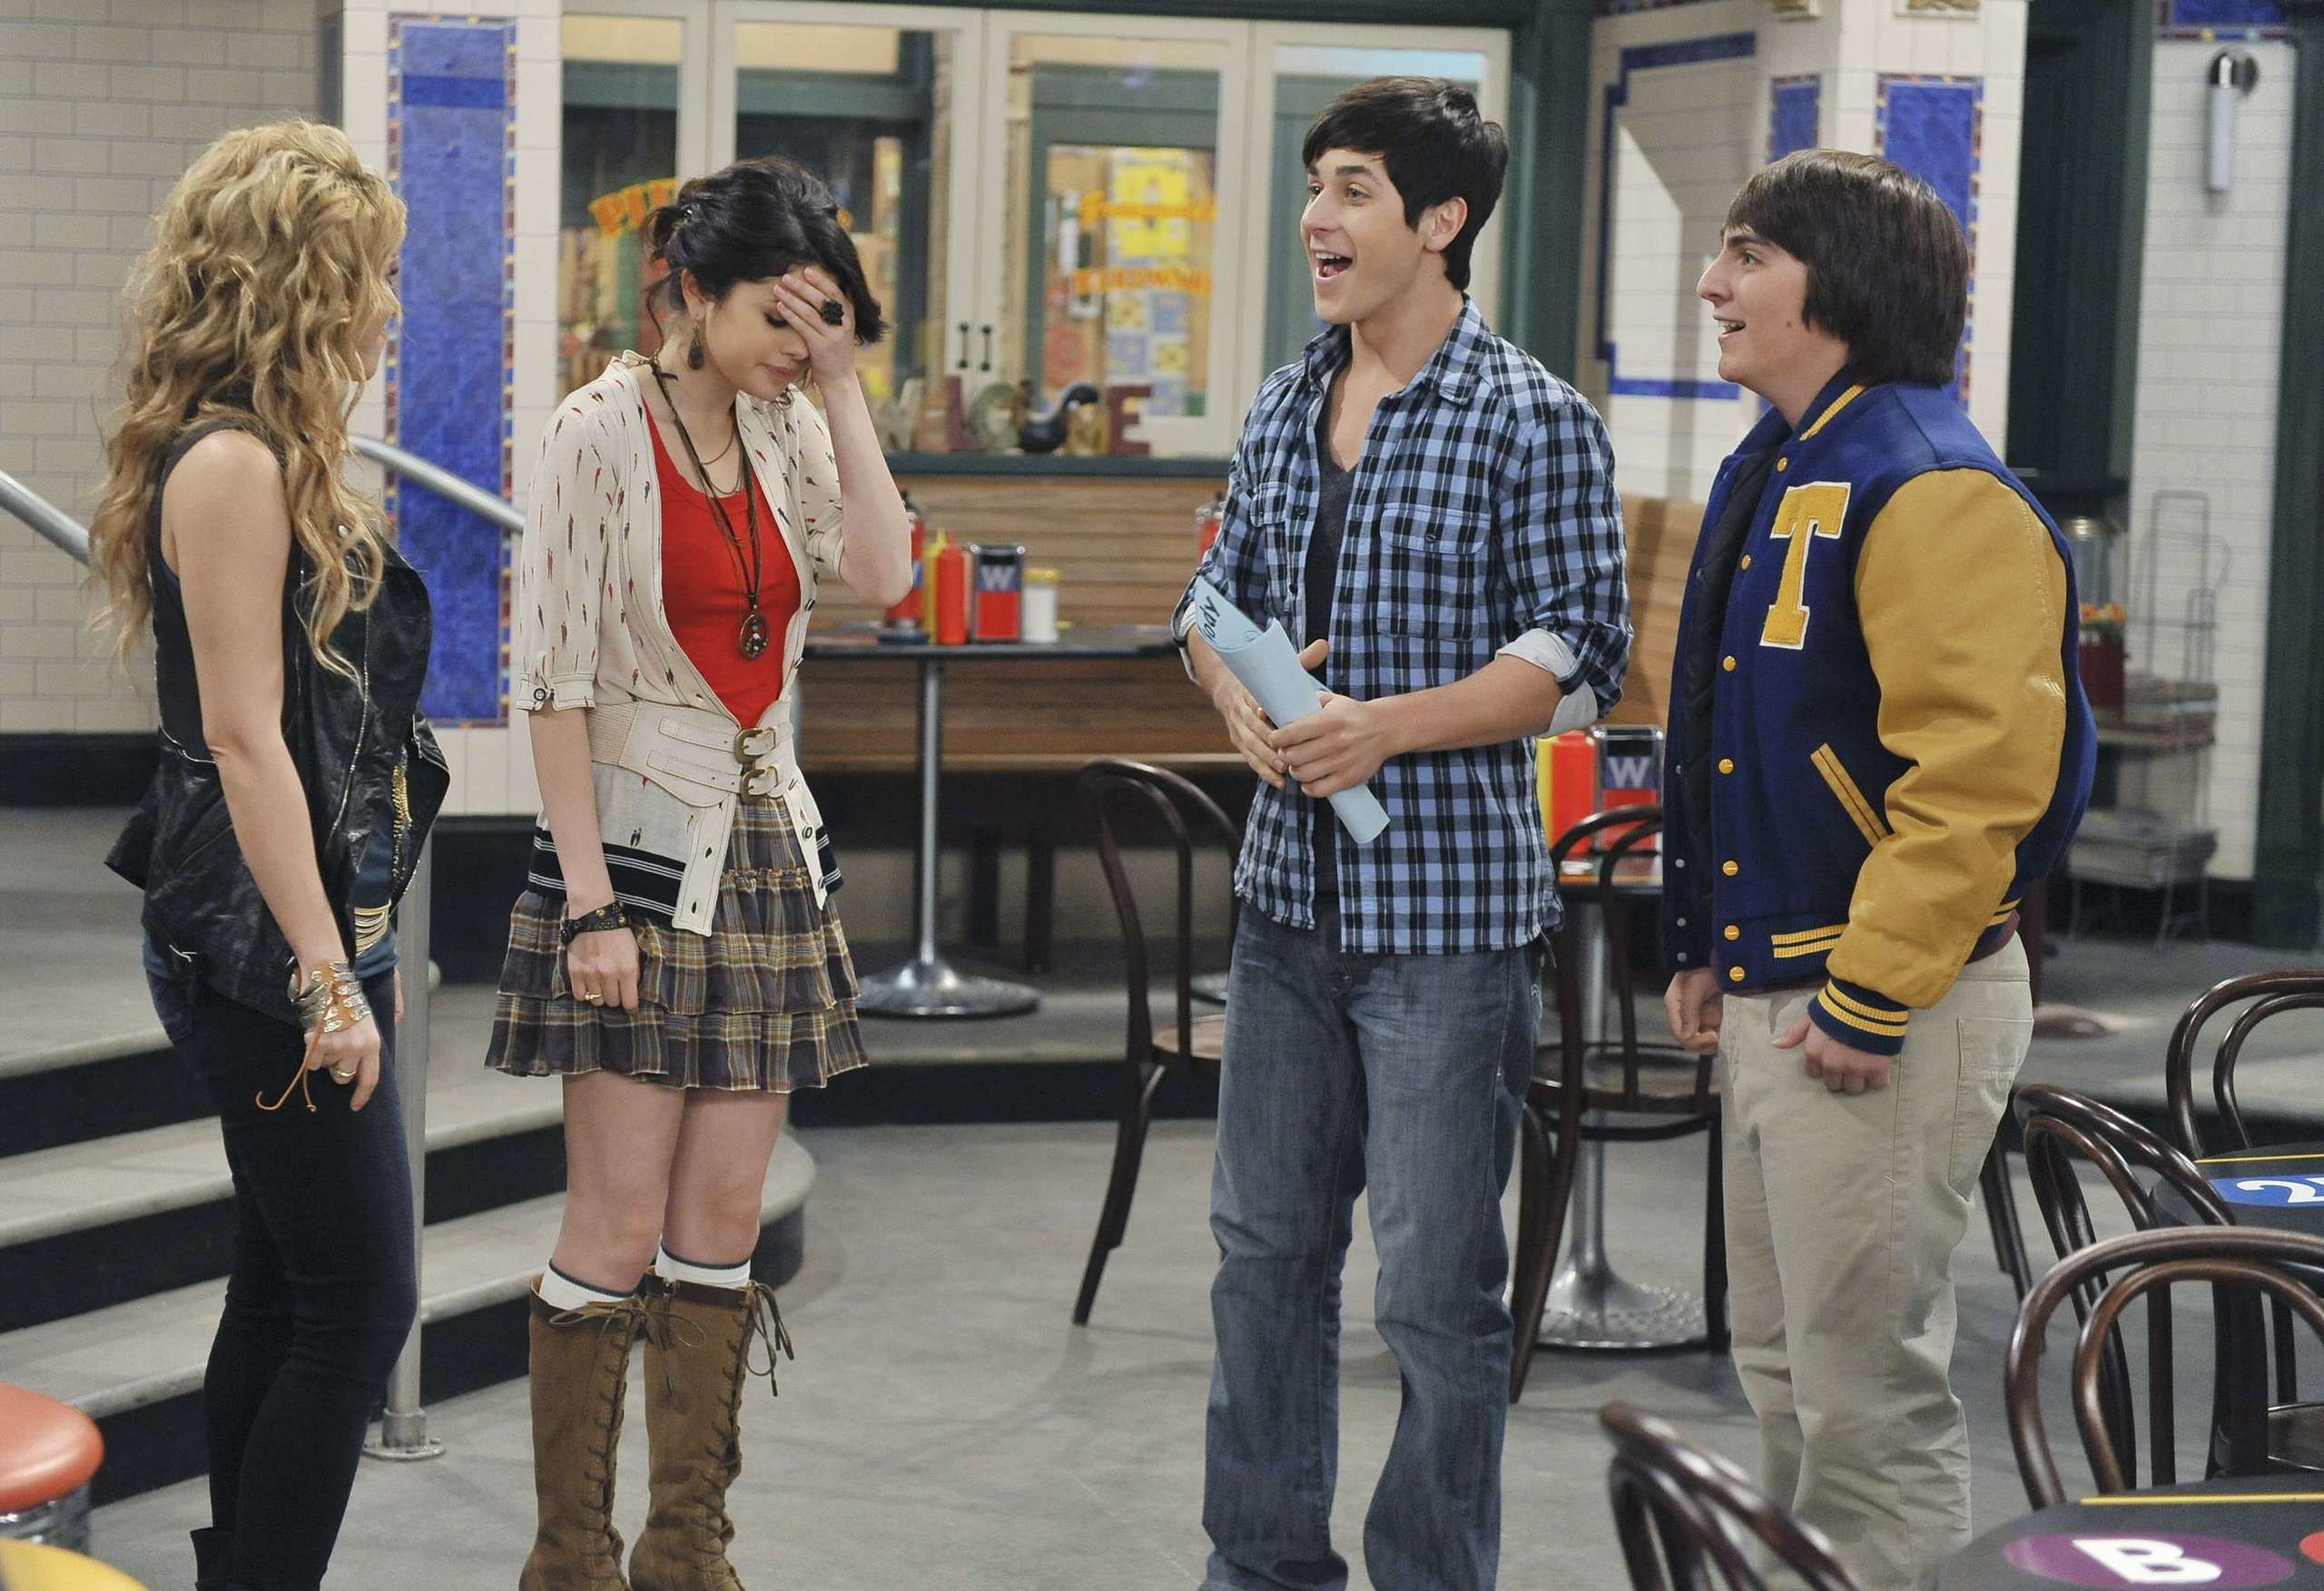 Wizards of Waverly Place Wallpapers.